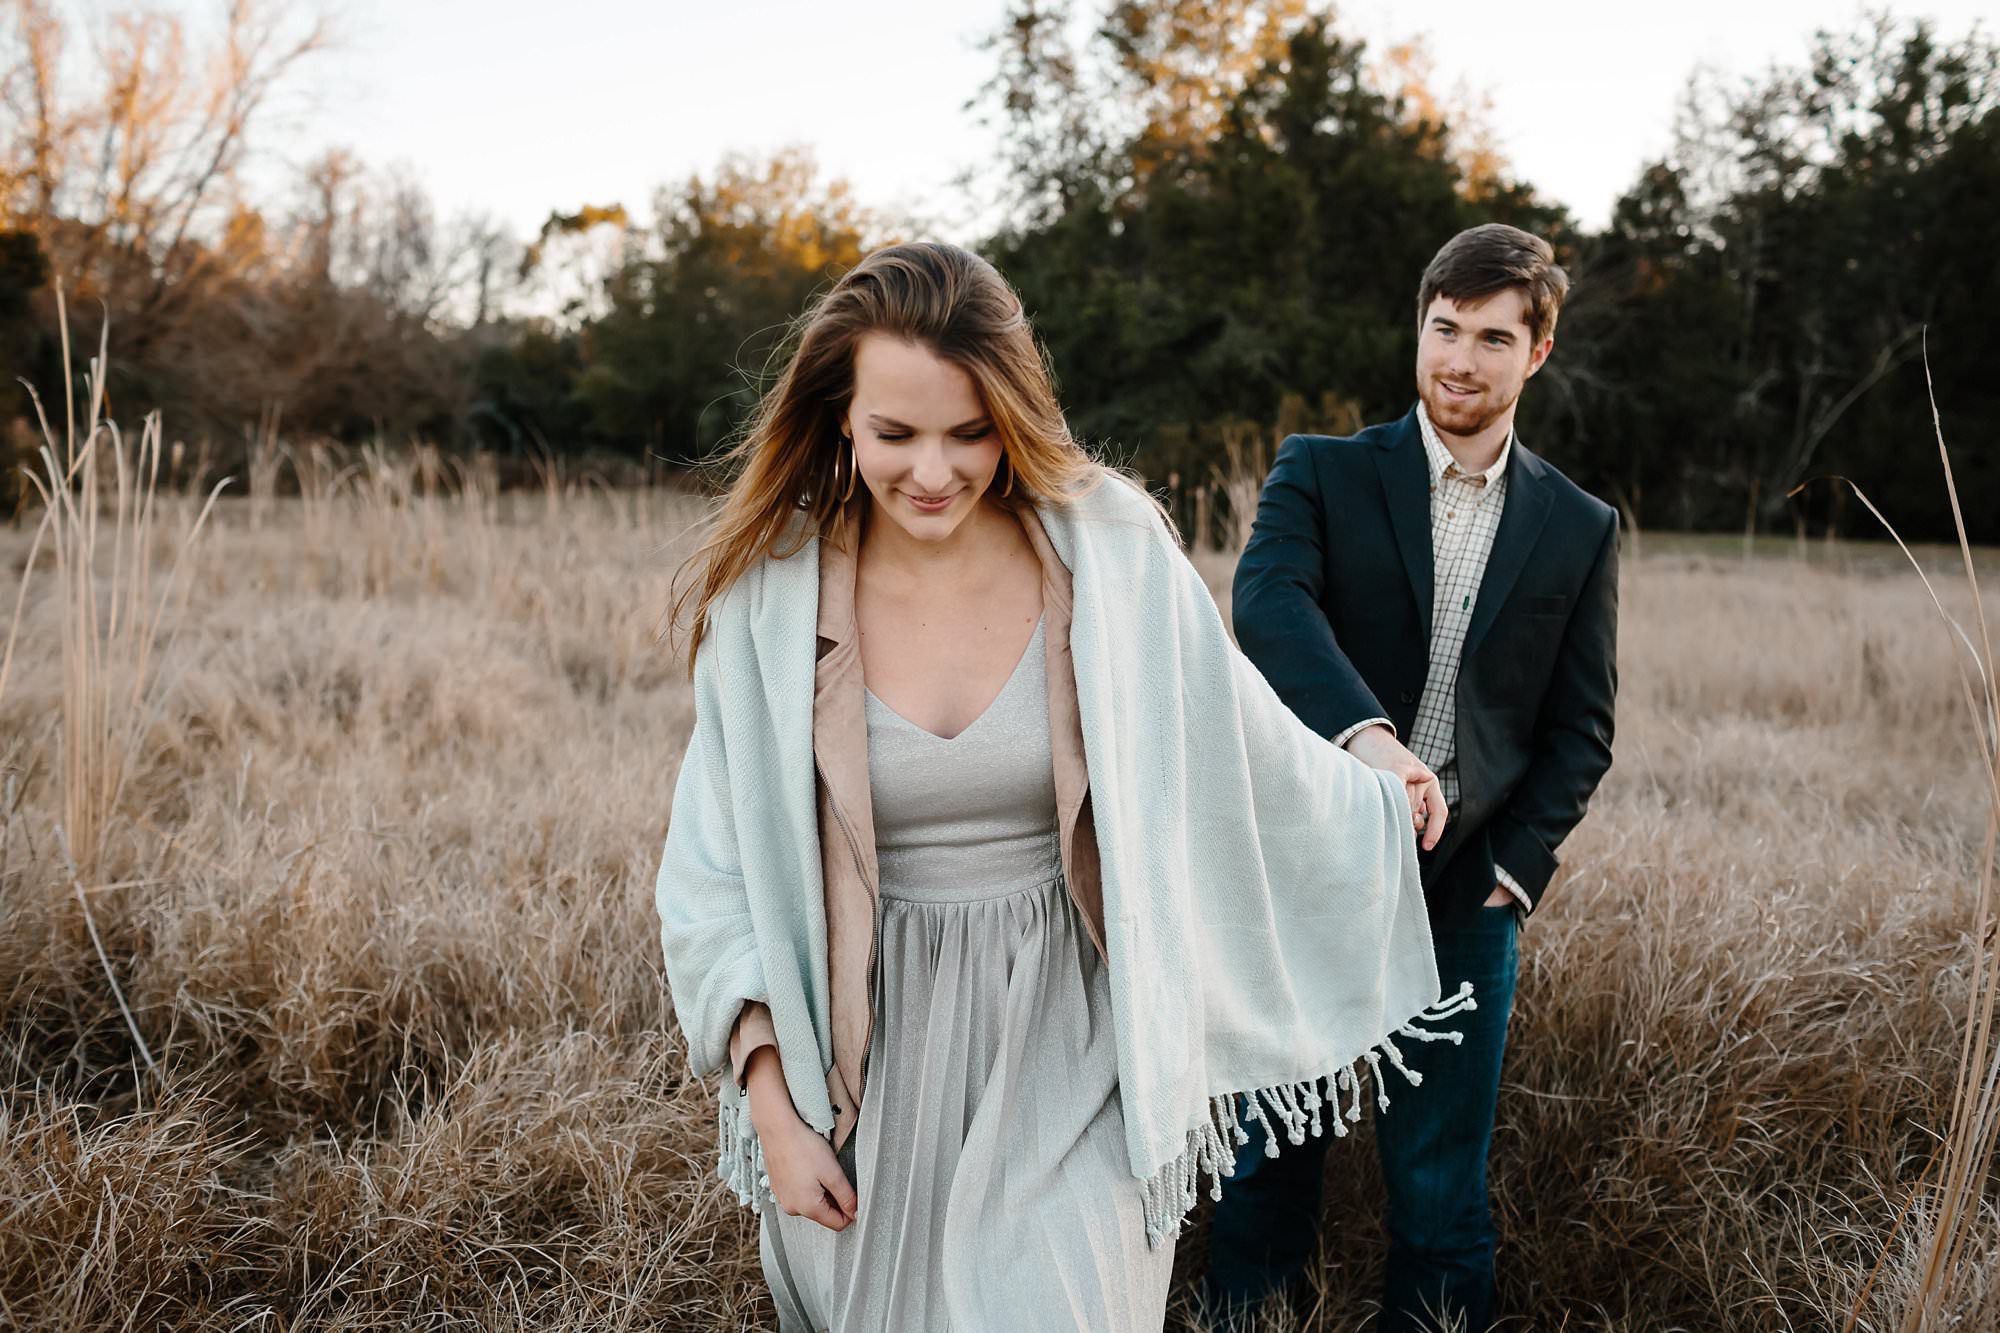 Megan in a short sundress wrapped in a blanket leading Turner out of a field of tall grass